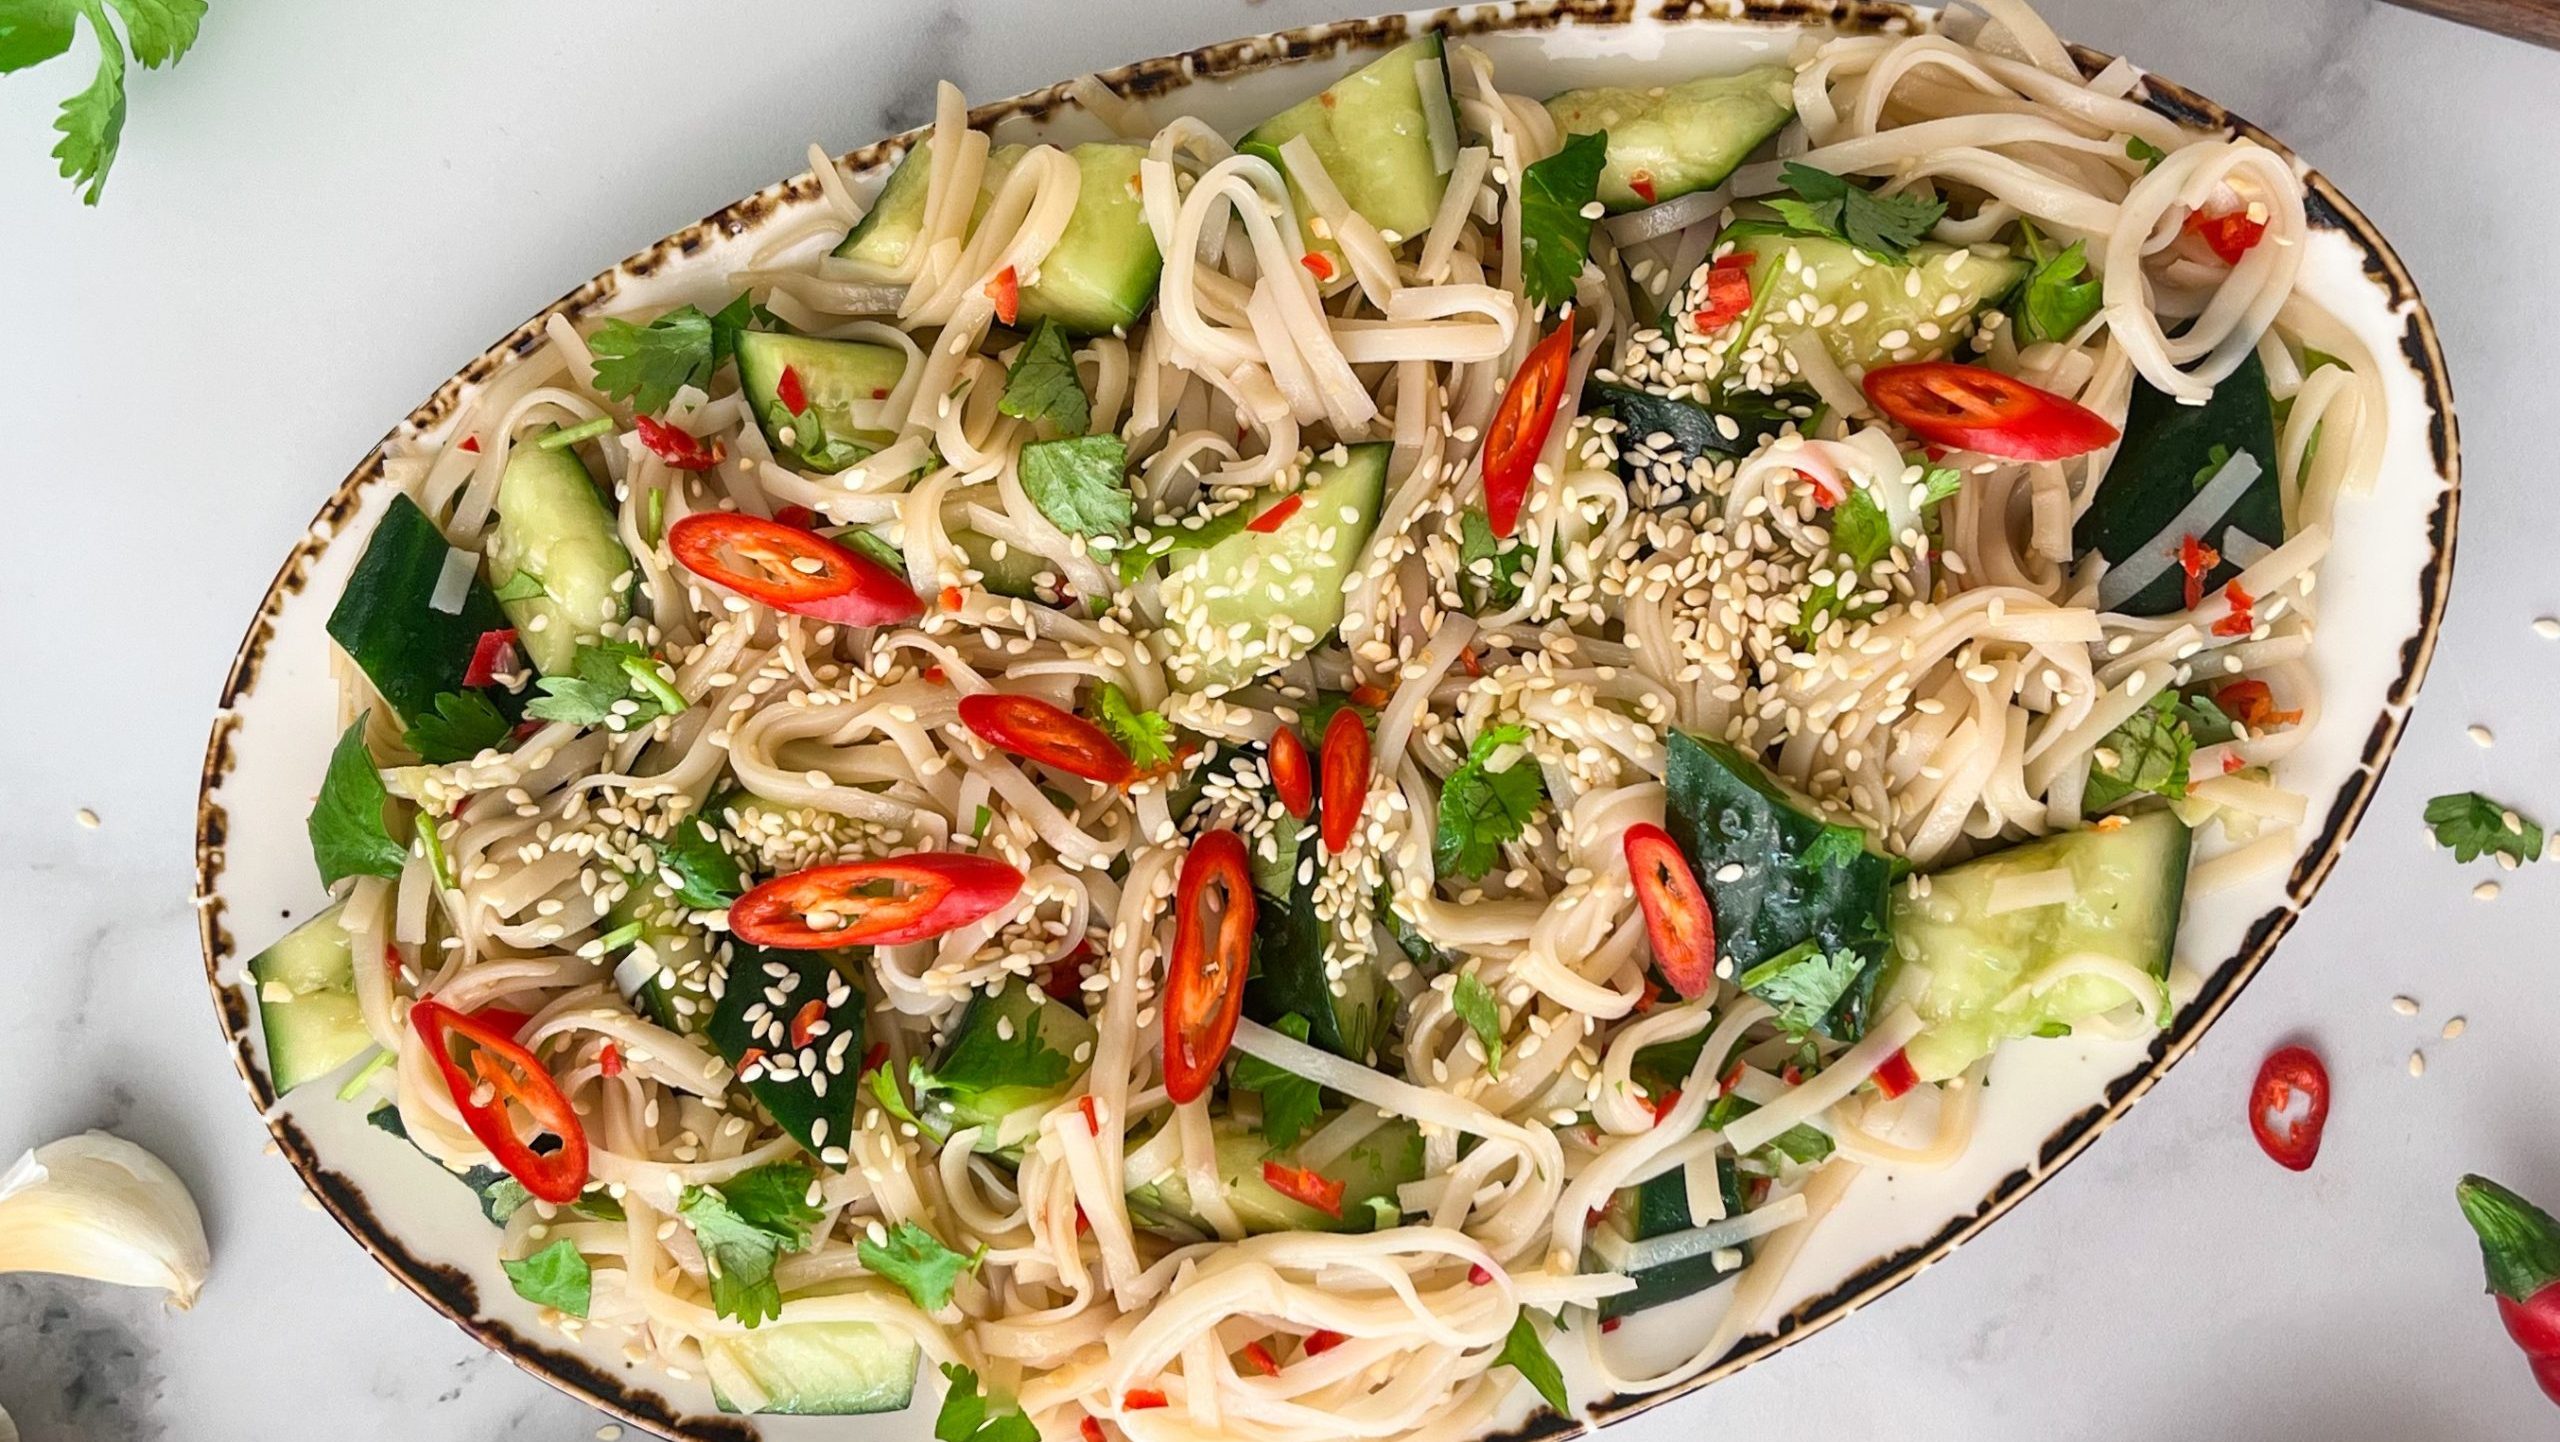 An oval plate full of noodles topped with cucumber pieces, green herbs, red chilli and sesame seeds.